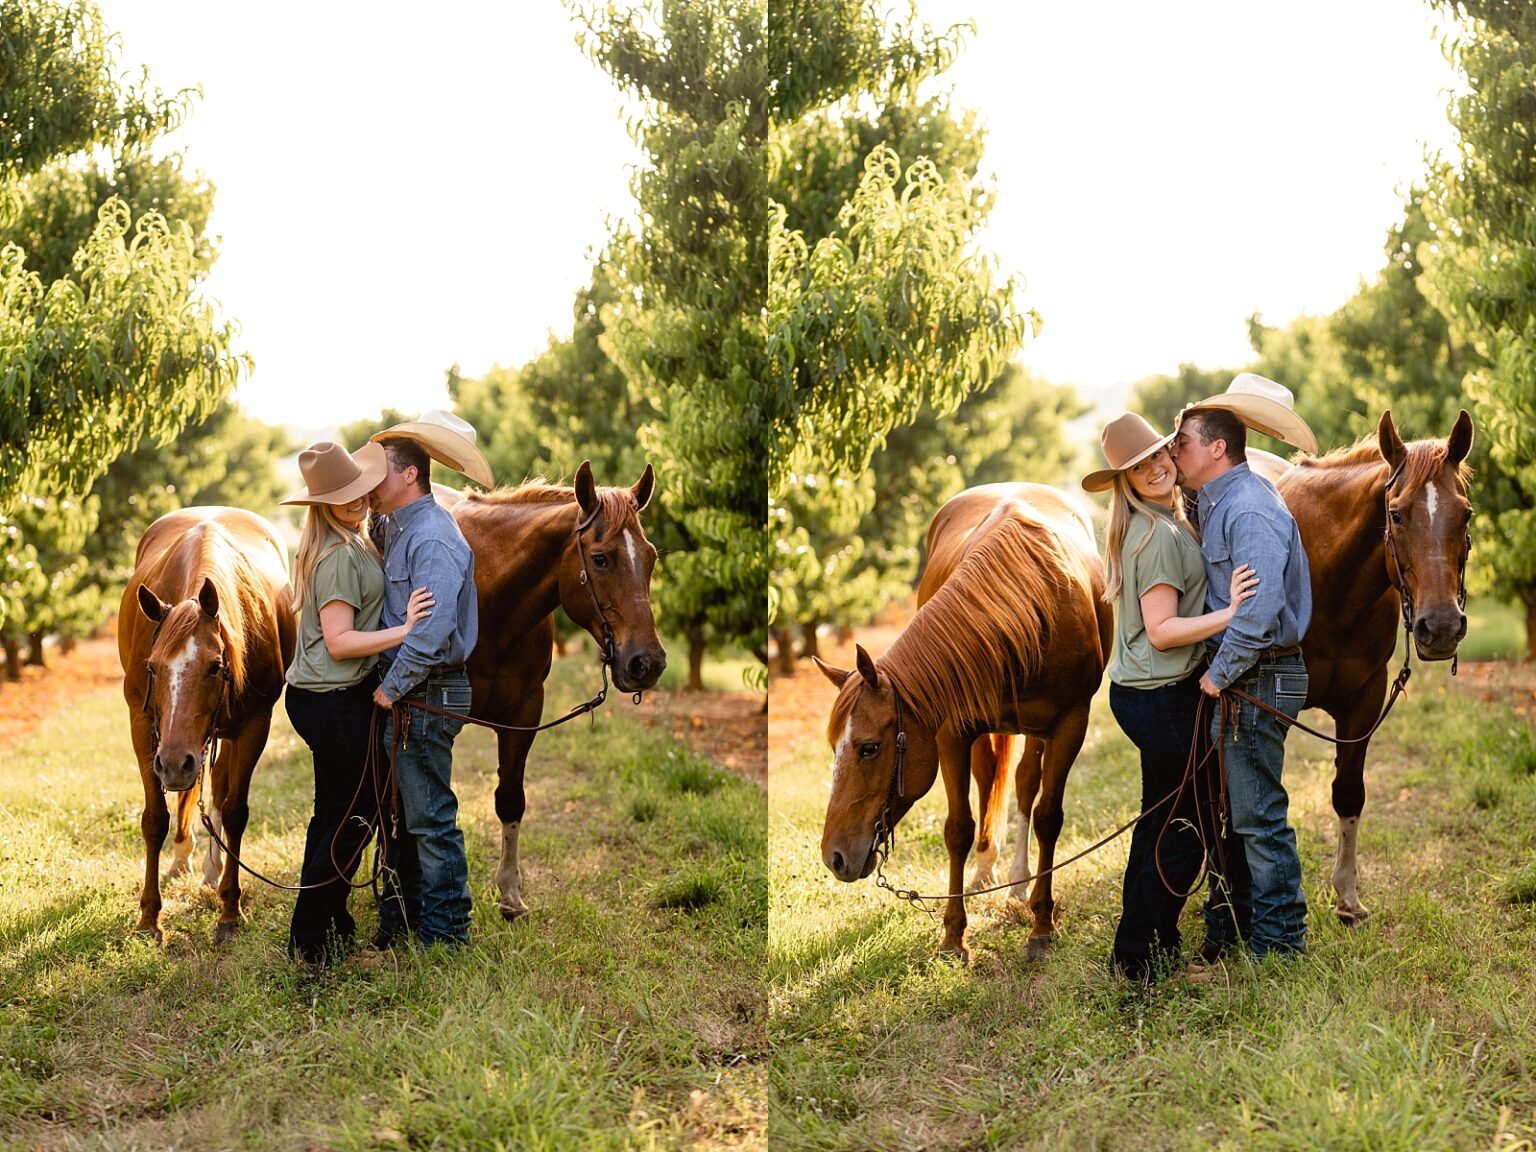 Posing ideas for couples with two horses. Western couple takes photos together with two horses in Northern Alabama.